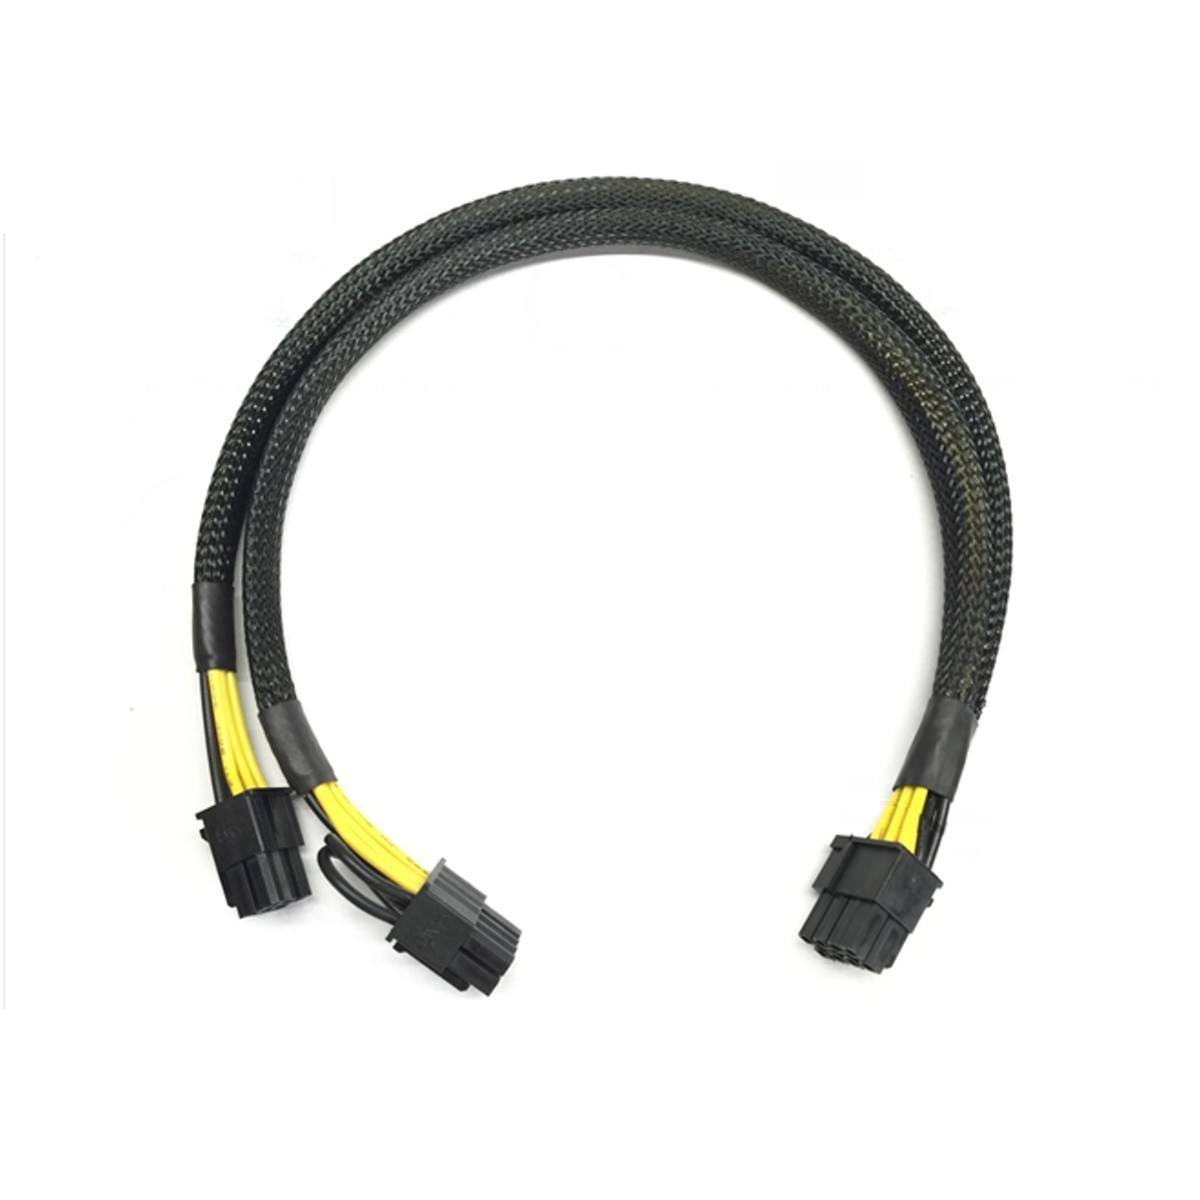 8pin to 6+6pin Power Cable for DELL R720 and NVIDIA Quadro K6000 GPU 50cm